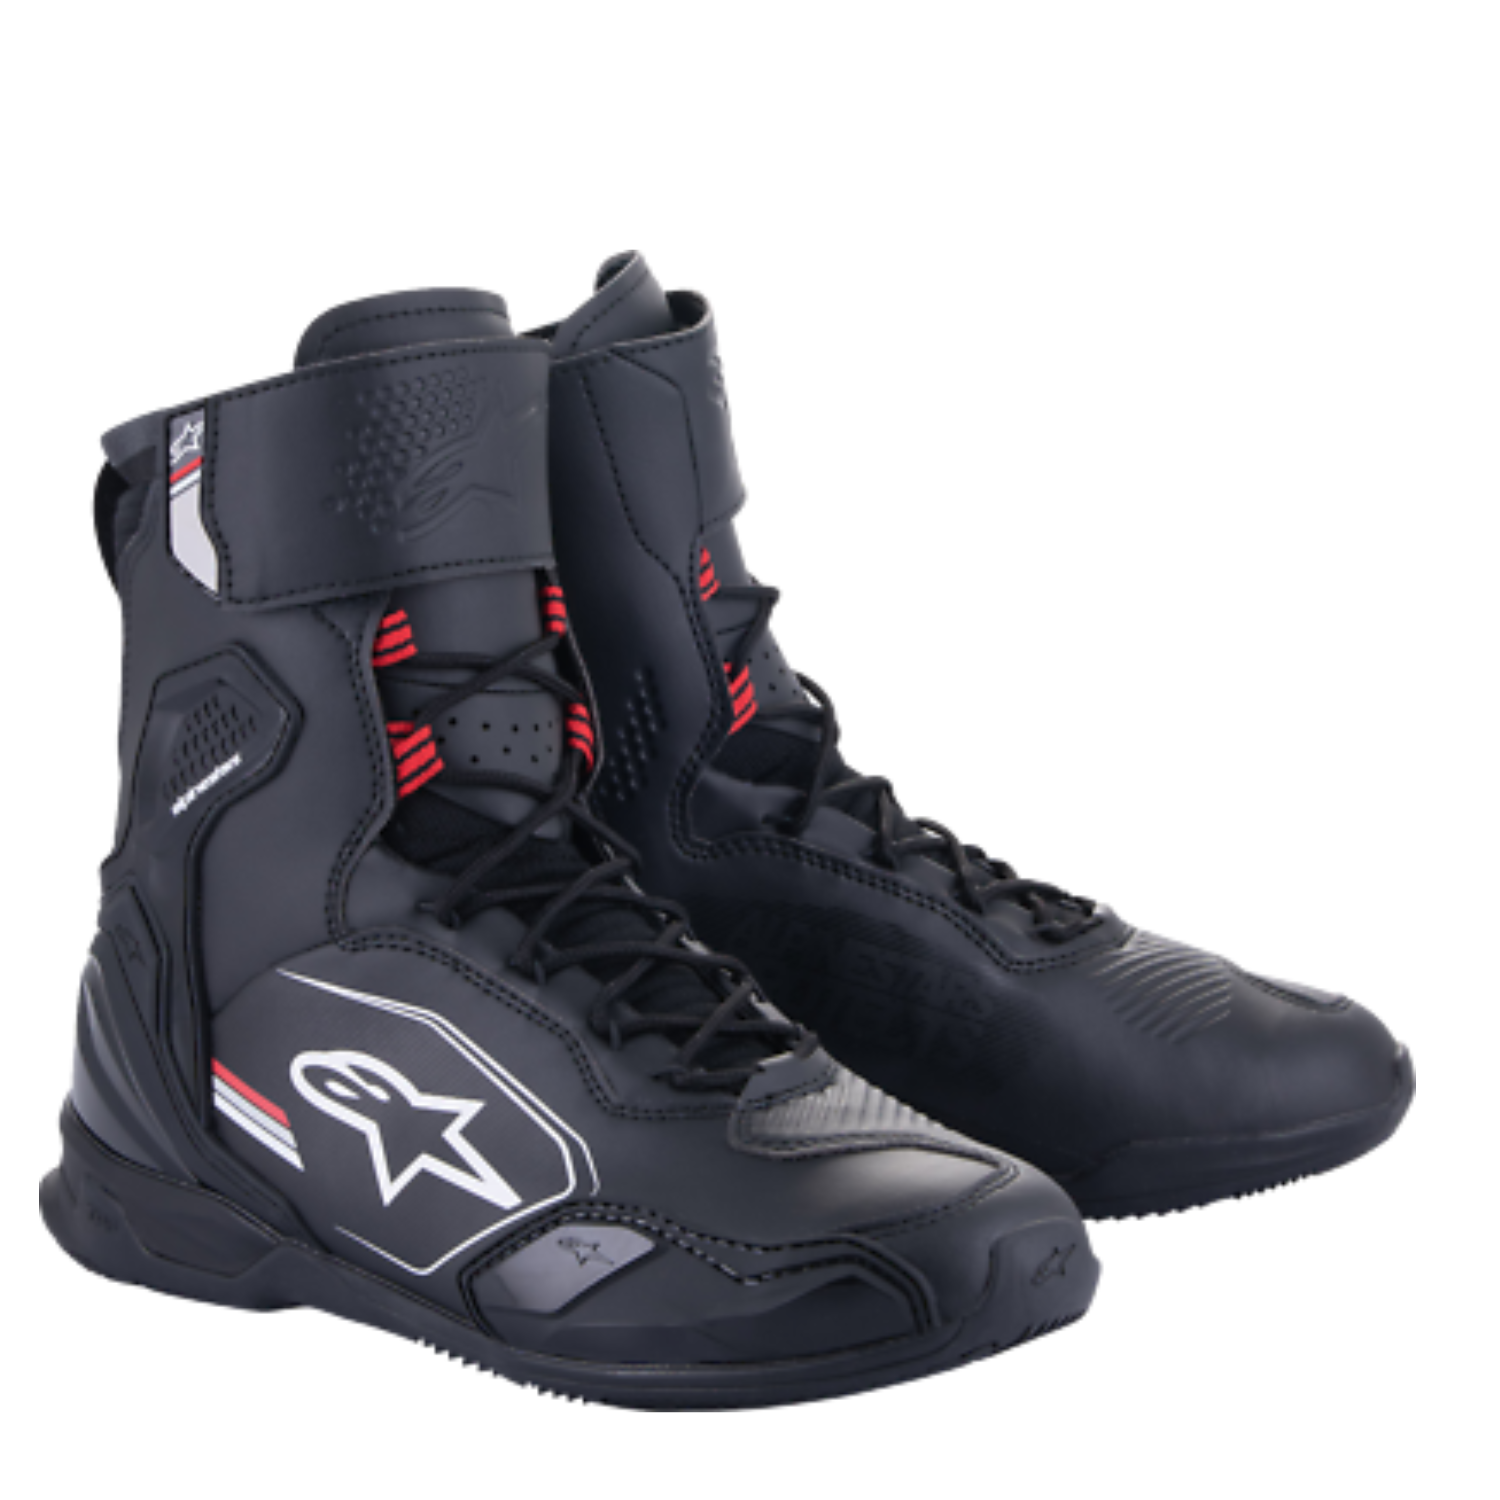 Image of Alpinestars Superfaster Shoes Black Gray Bright Red Taille US 12